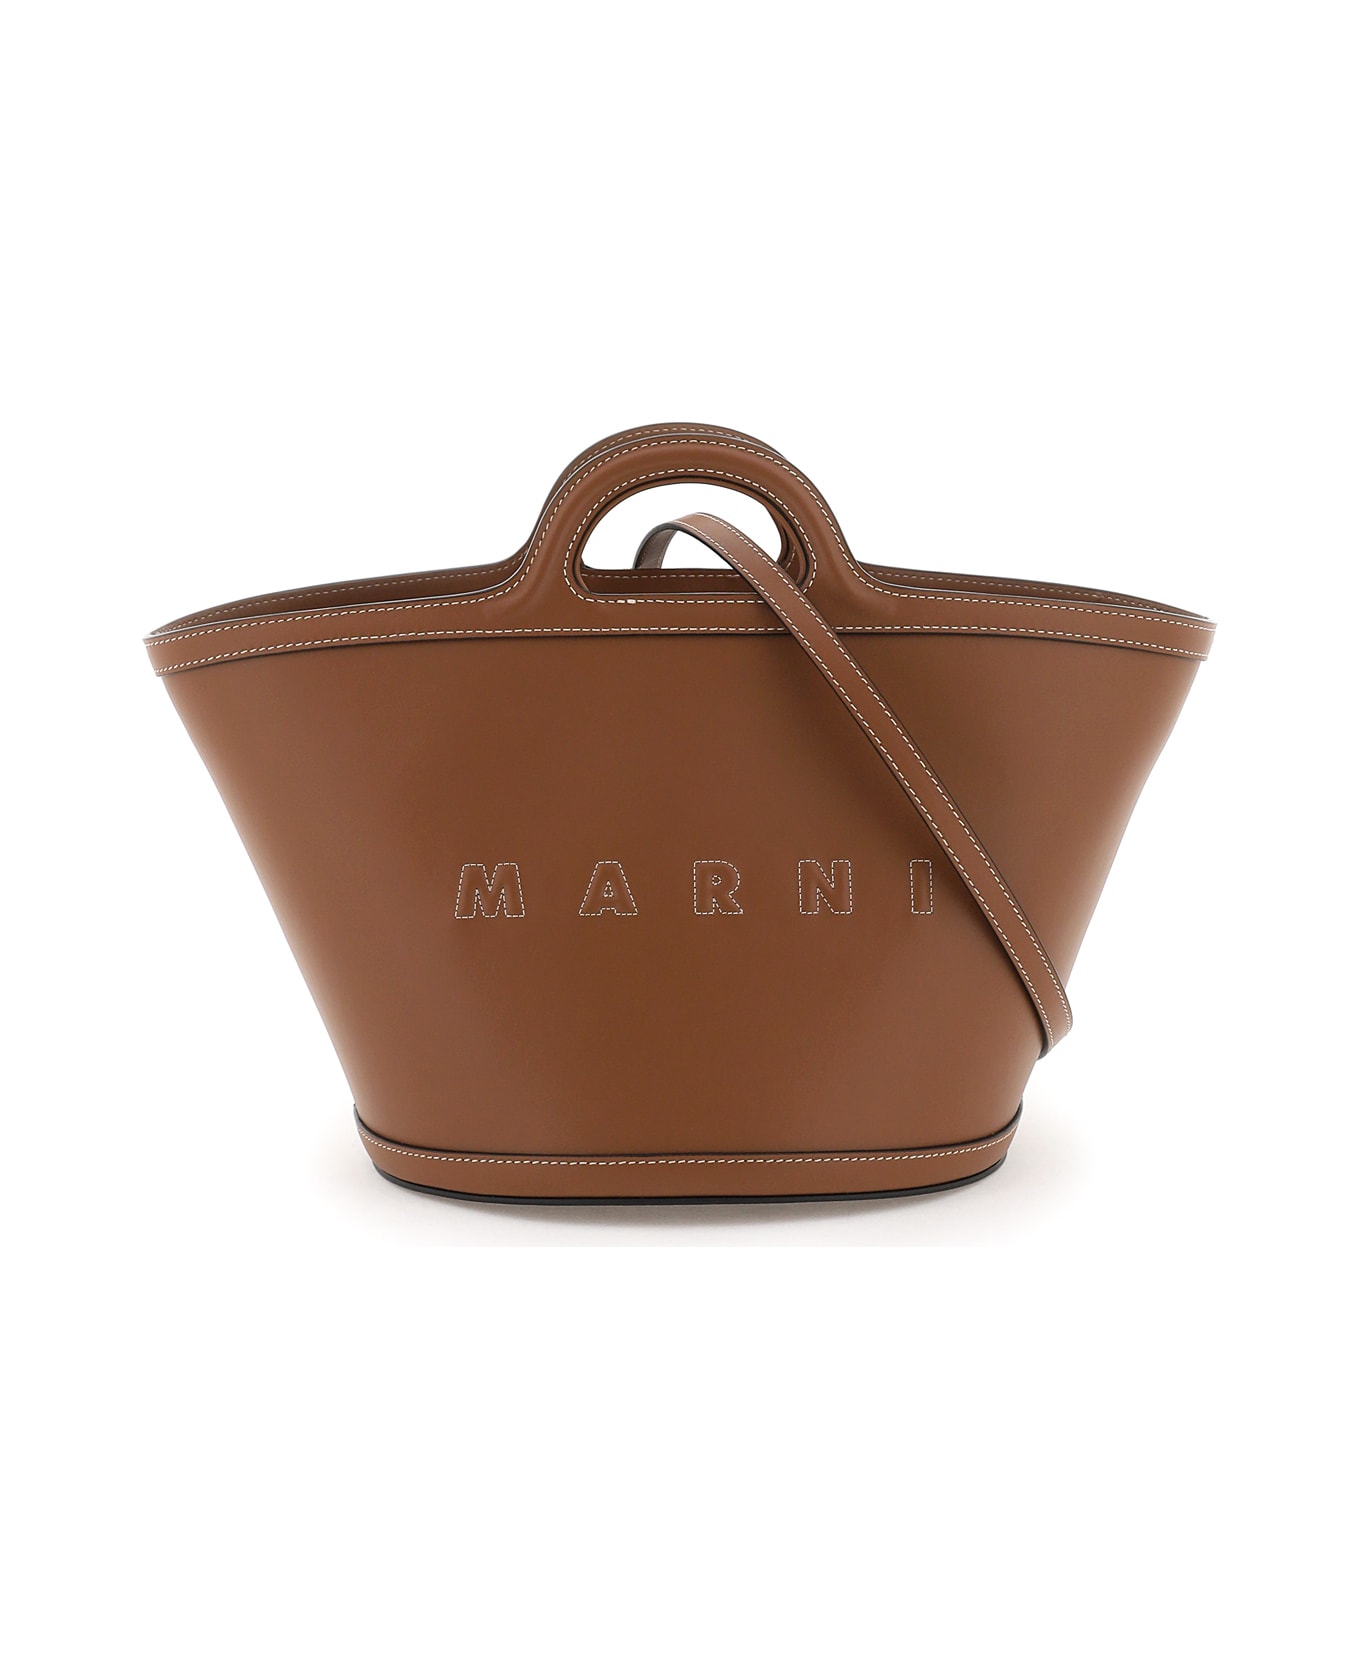 Marni Tropicalia Small Bag In Brown Leather - 00M29 トートバッグ